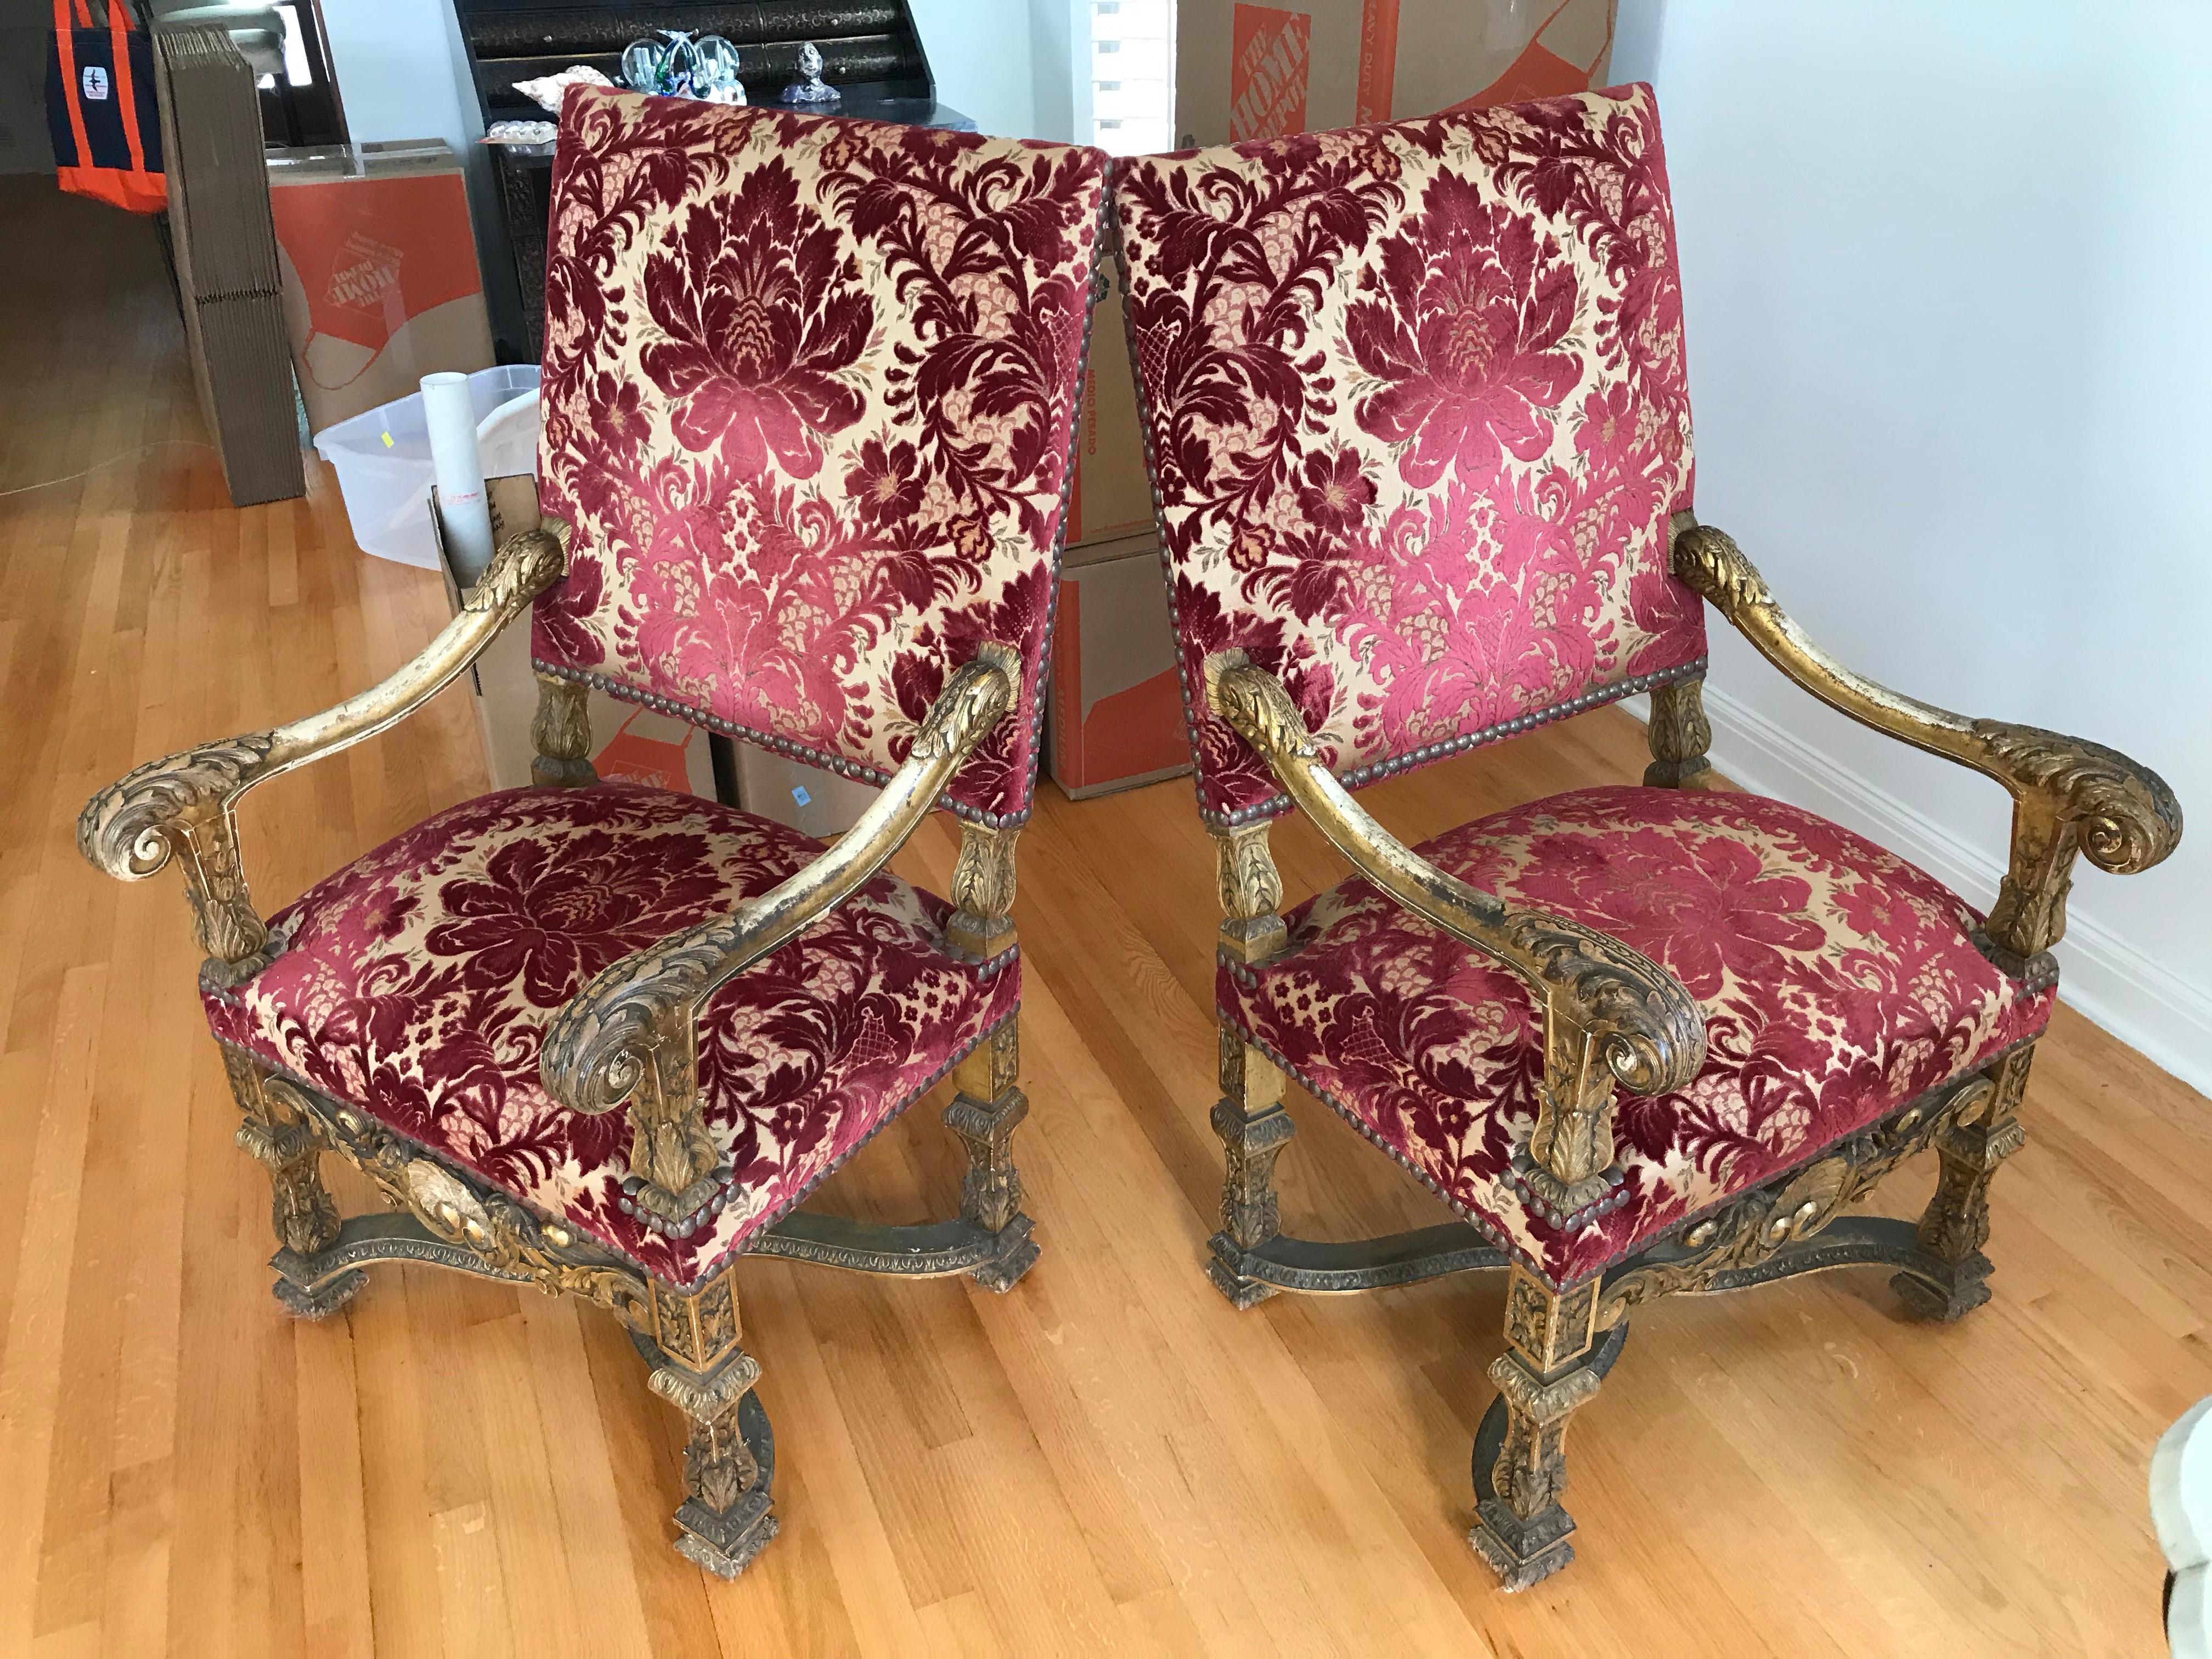 Styled with elaborate hand carvings accented with central shell cartouches along the seat apron.
Fine old world workmanship. Accented with cut velvet upholstery.